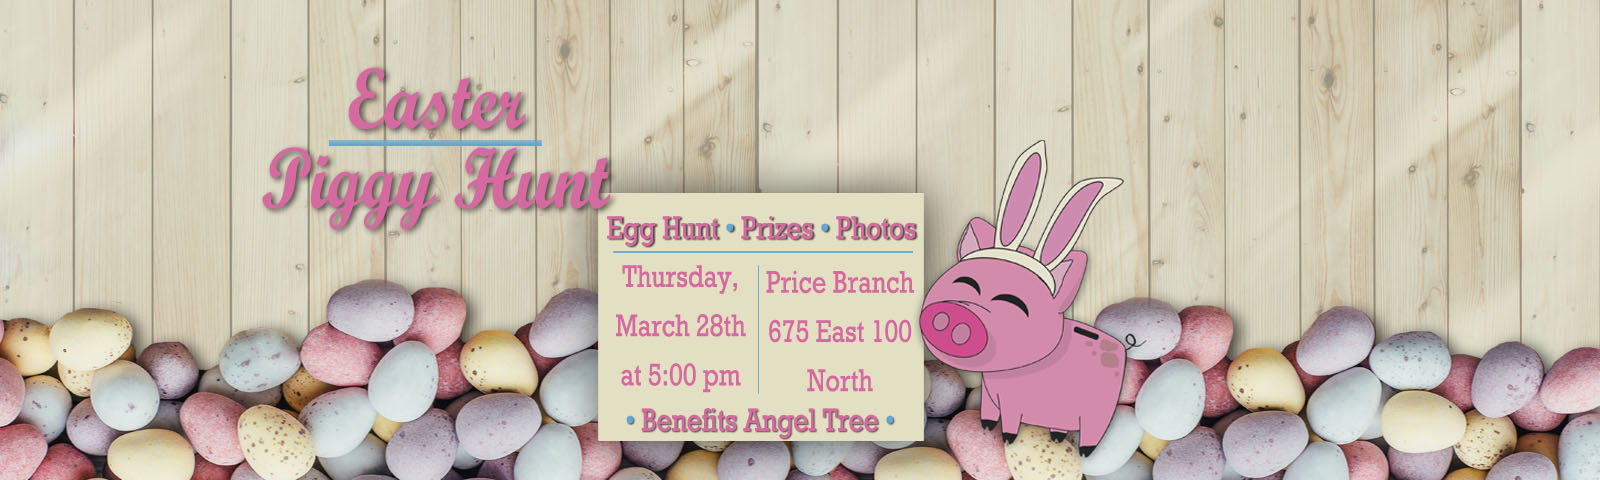 Easter Piggy Hunt. Enjoy an egg hunt, prizes and photos on Thursday, March 28th at 5pm at our Price Branch. The event benefits our Angel Tree.